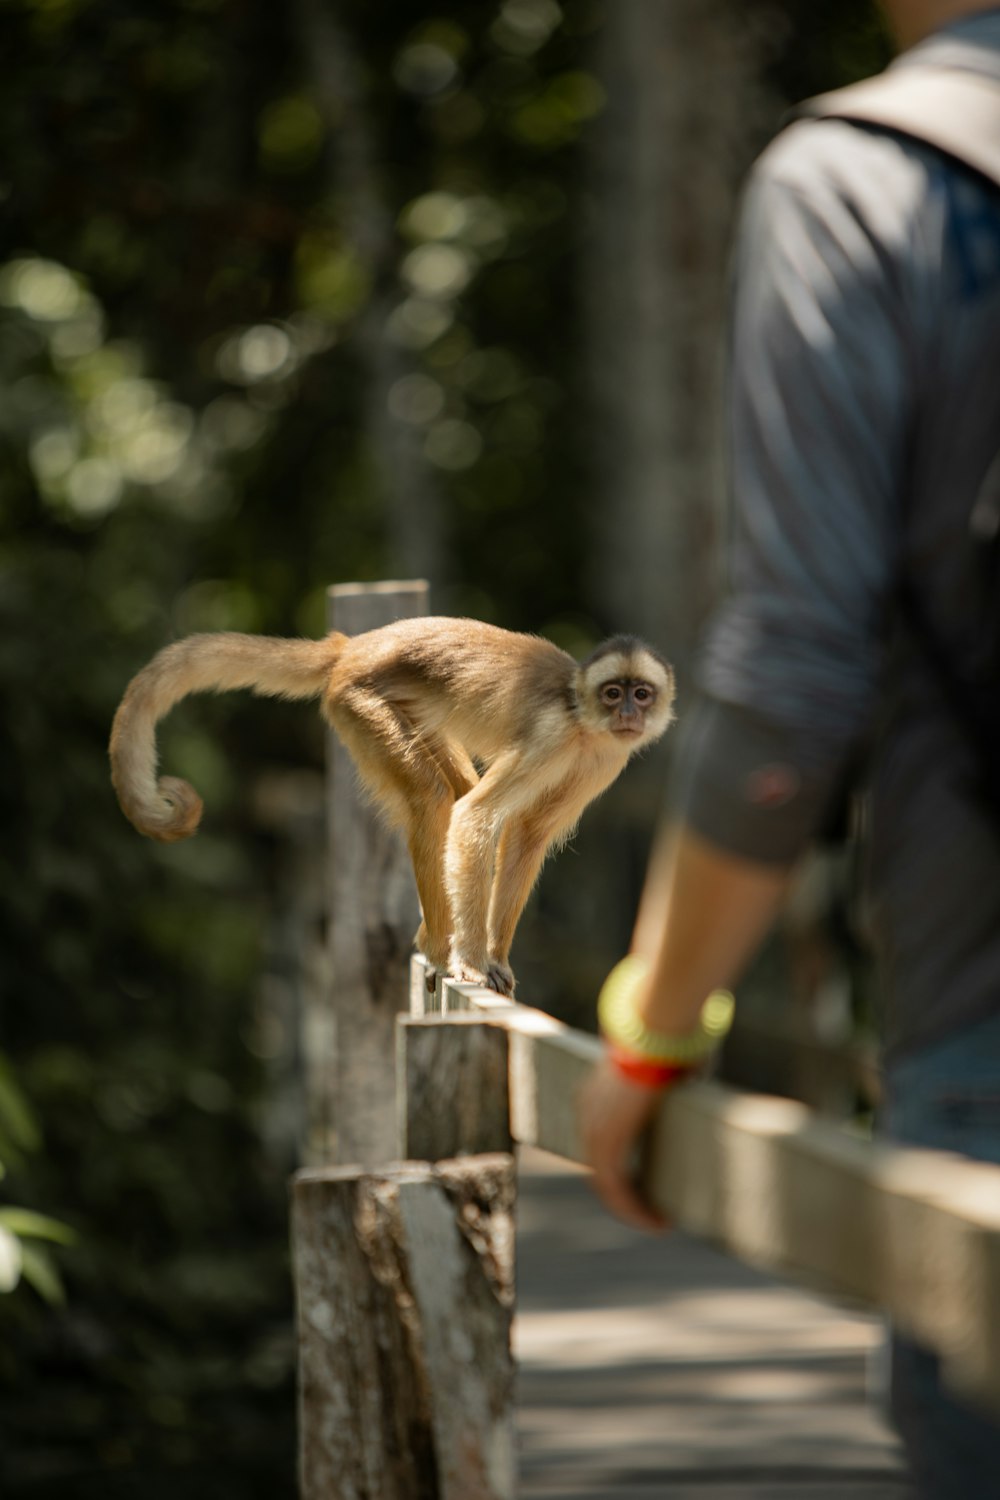 a small monkey standing on a wooden rail